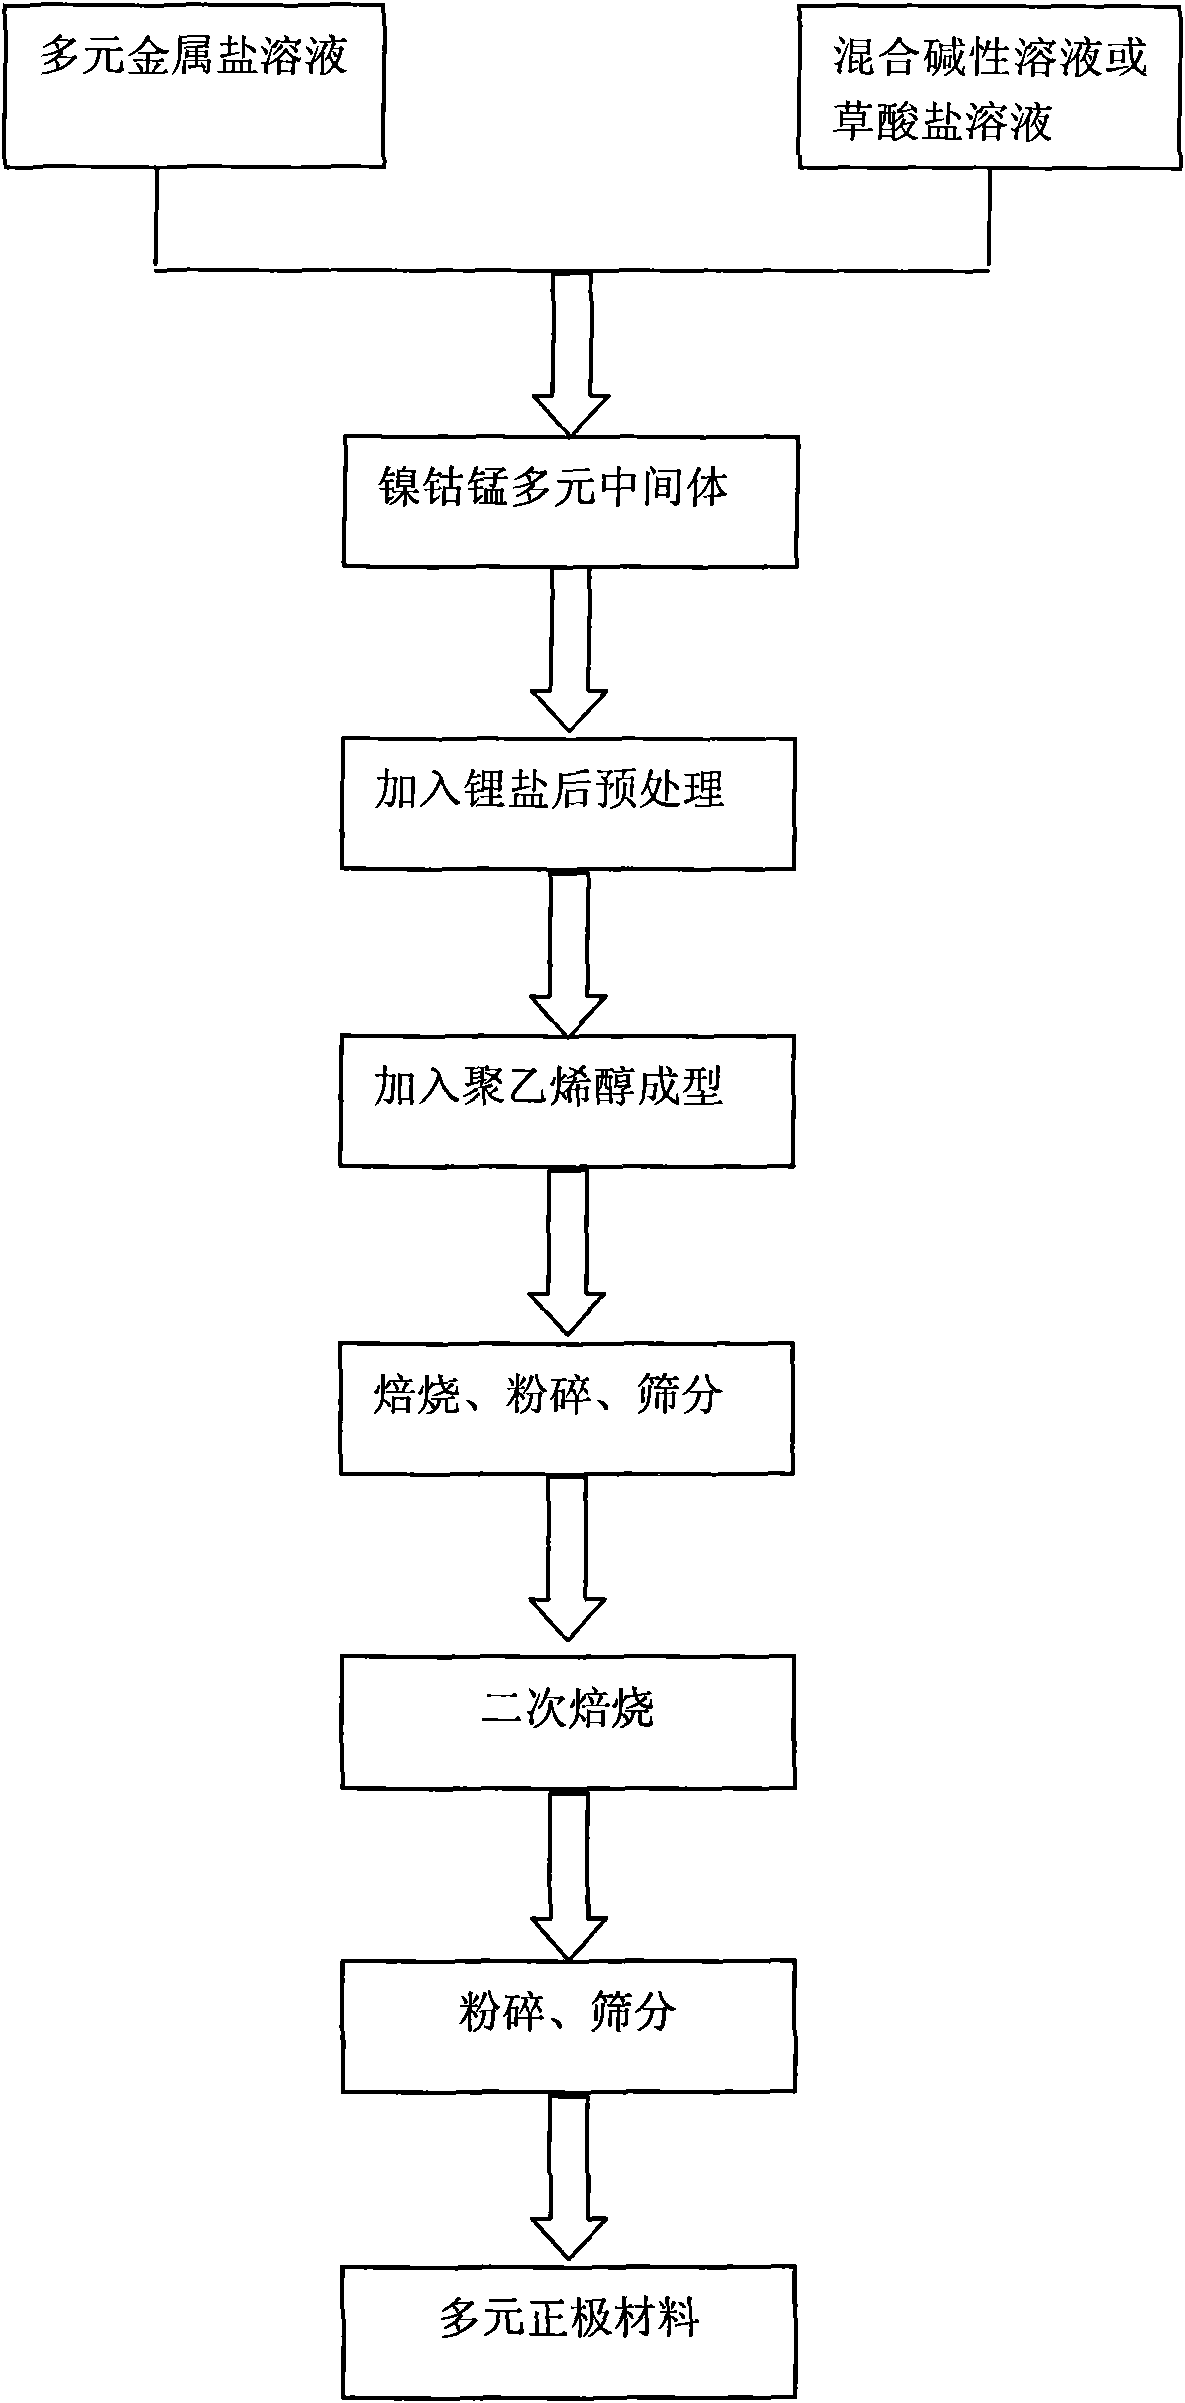 Nickel-cobalt-manganese multi-doped lithium ion battery cathode material and preparation method thereof